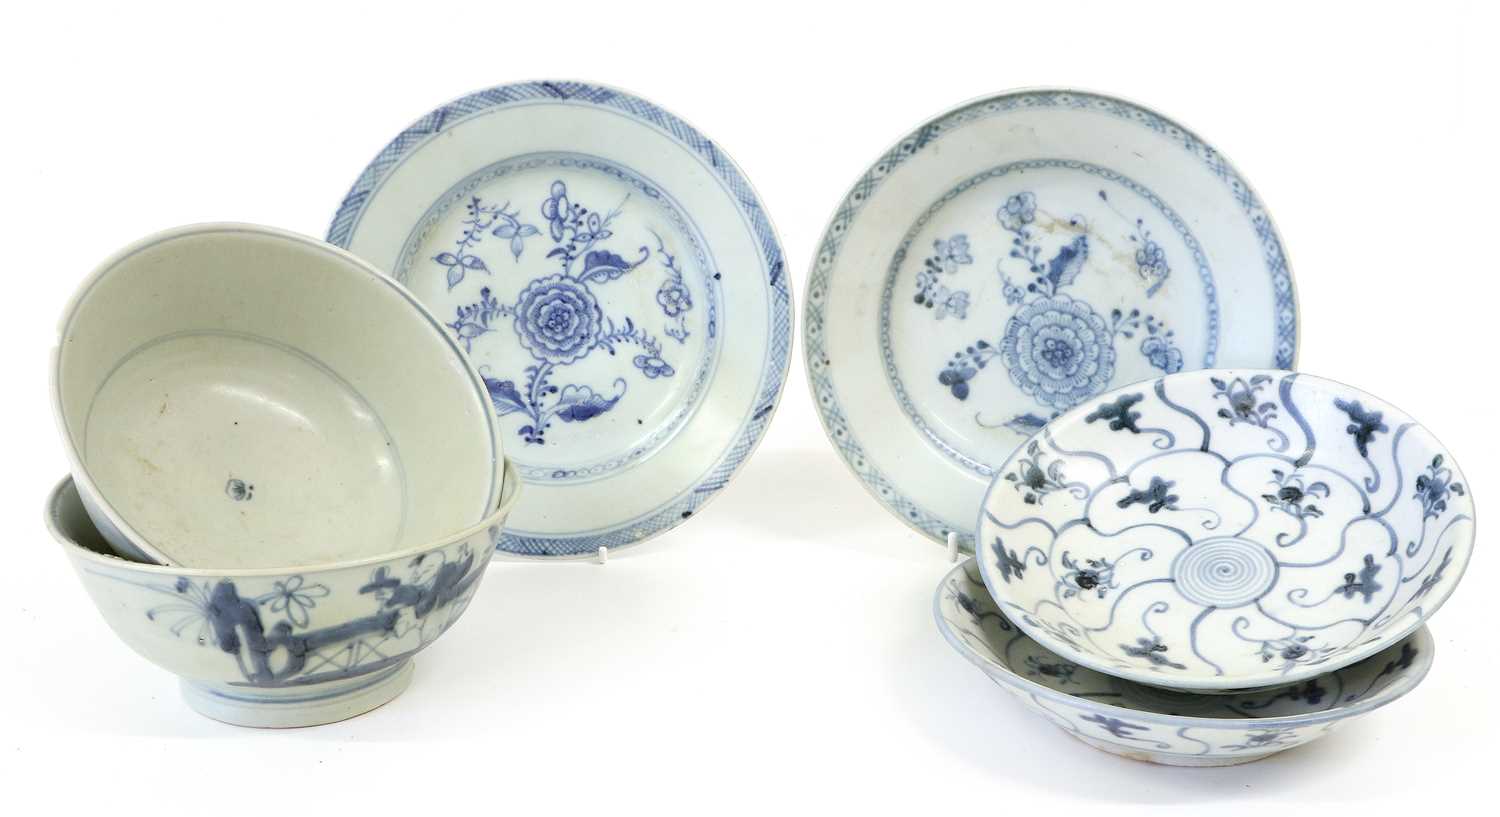 Two Chinese Porcelain "Tek Sing" Bowls, each painted in underglaze blue with a boy in a landscape